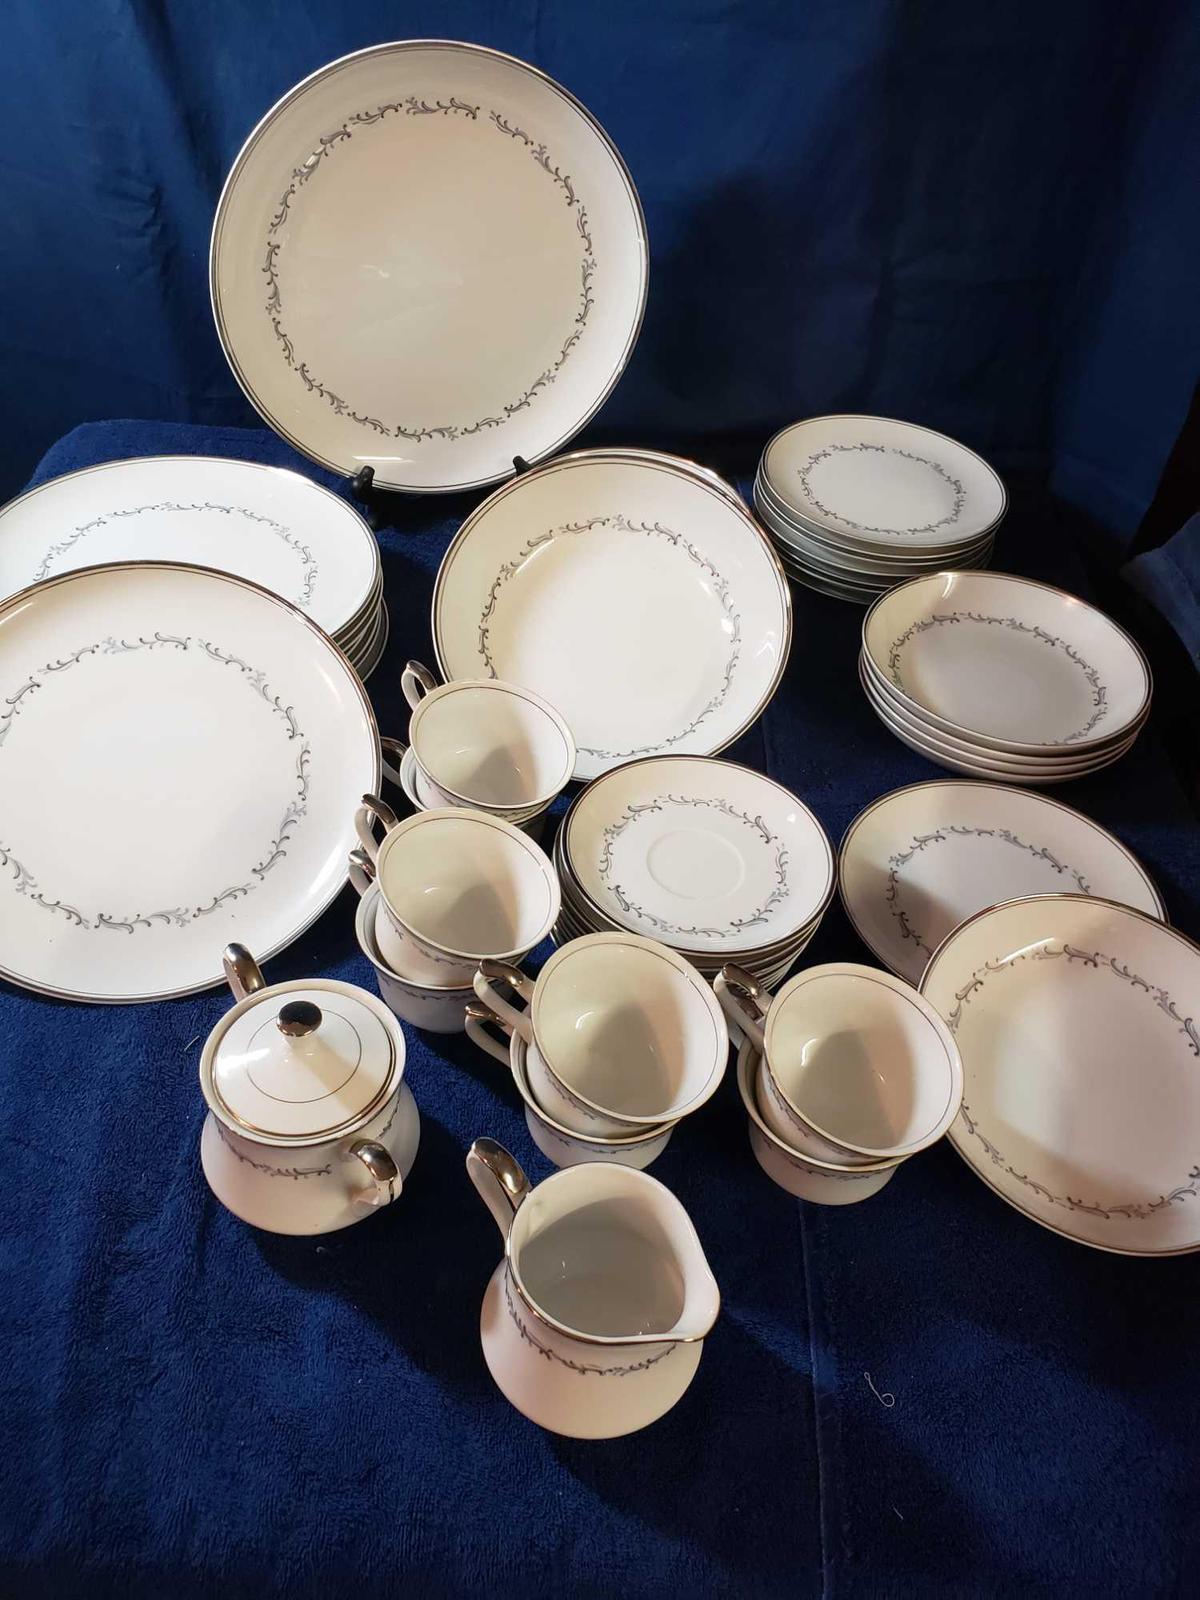 45 Piece Express China from Japan with blue & grey designs with silver trim